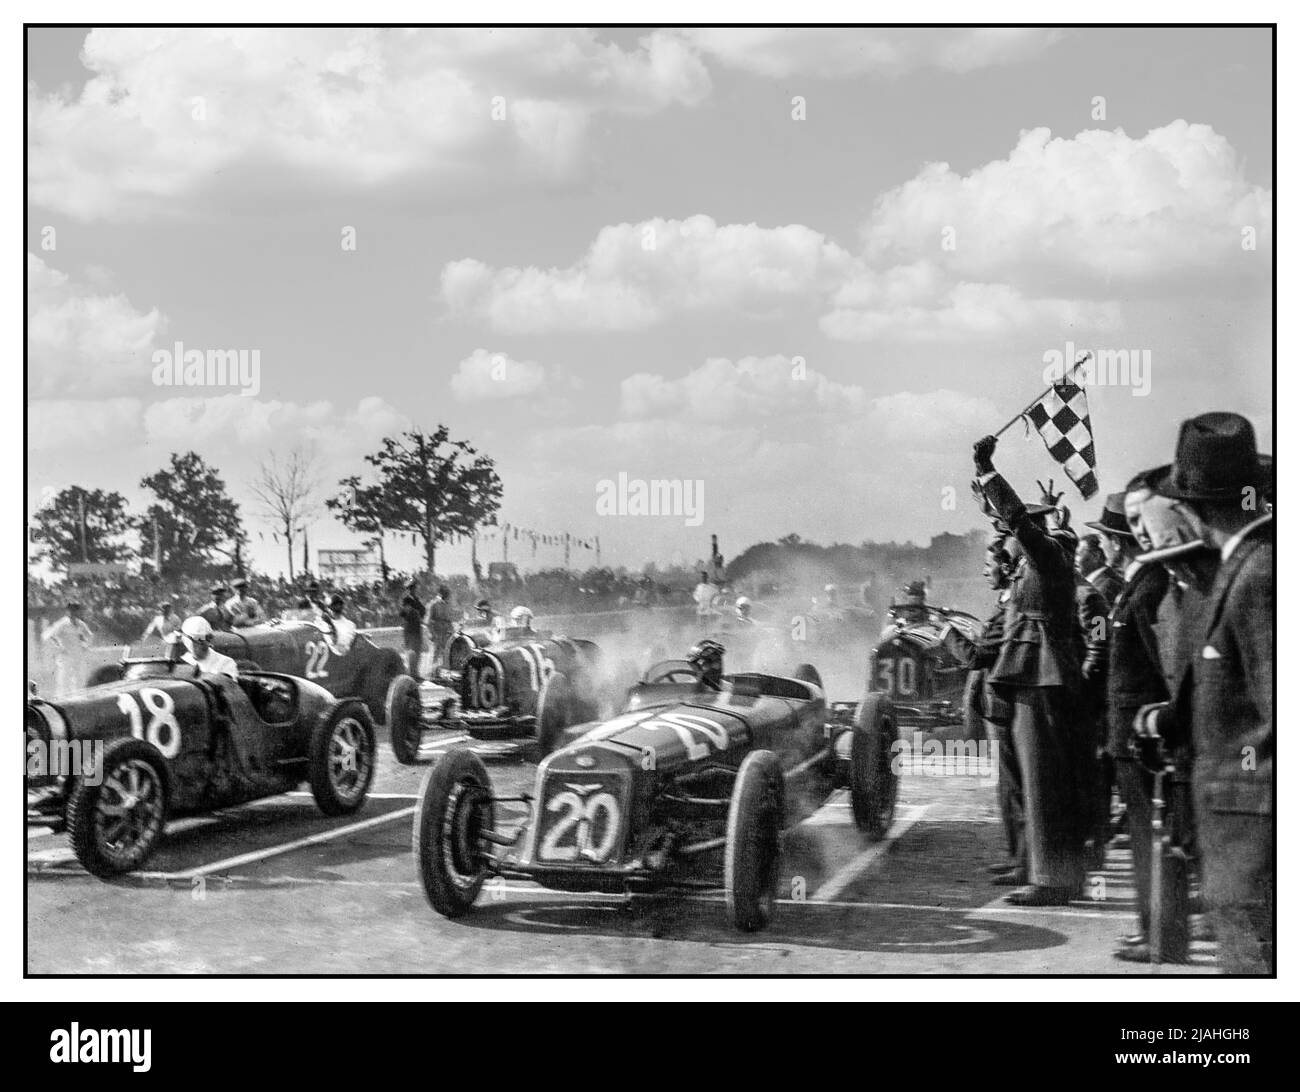 ITALIAN MONZA Grand Prix 1931 START GRID FLAG Start of the 1931 Italian Grand Prix 1931   The 1931 Italian Grand Prix was a Grand Prix motor race held at Monza between 24 May 1931 and 28 May 1931. The race was the first of three Grands Prix that were part of the inaugural European Championship. The Alfa Romeo works team pairing of Giuseppe Campari and Tazio Nuvolari won the race, ahead of their teammates Ferdinando Minoia and Baconin Borzacchini in second, while third place went to the works Bugattis of Albert Divo and Guy Bouriat. This is the longest race in history, lasting 100 hours. Stock Photo